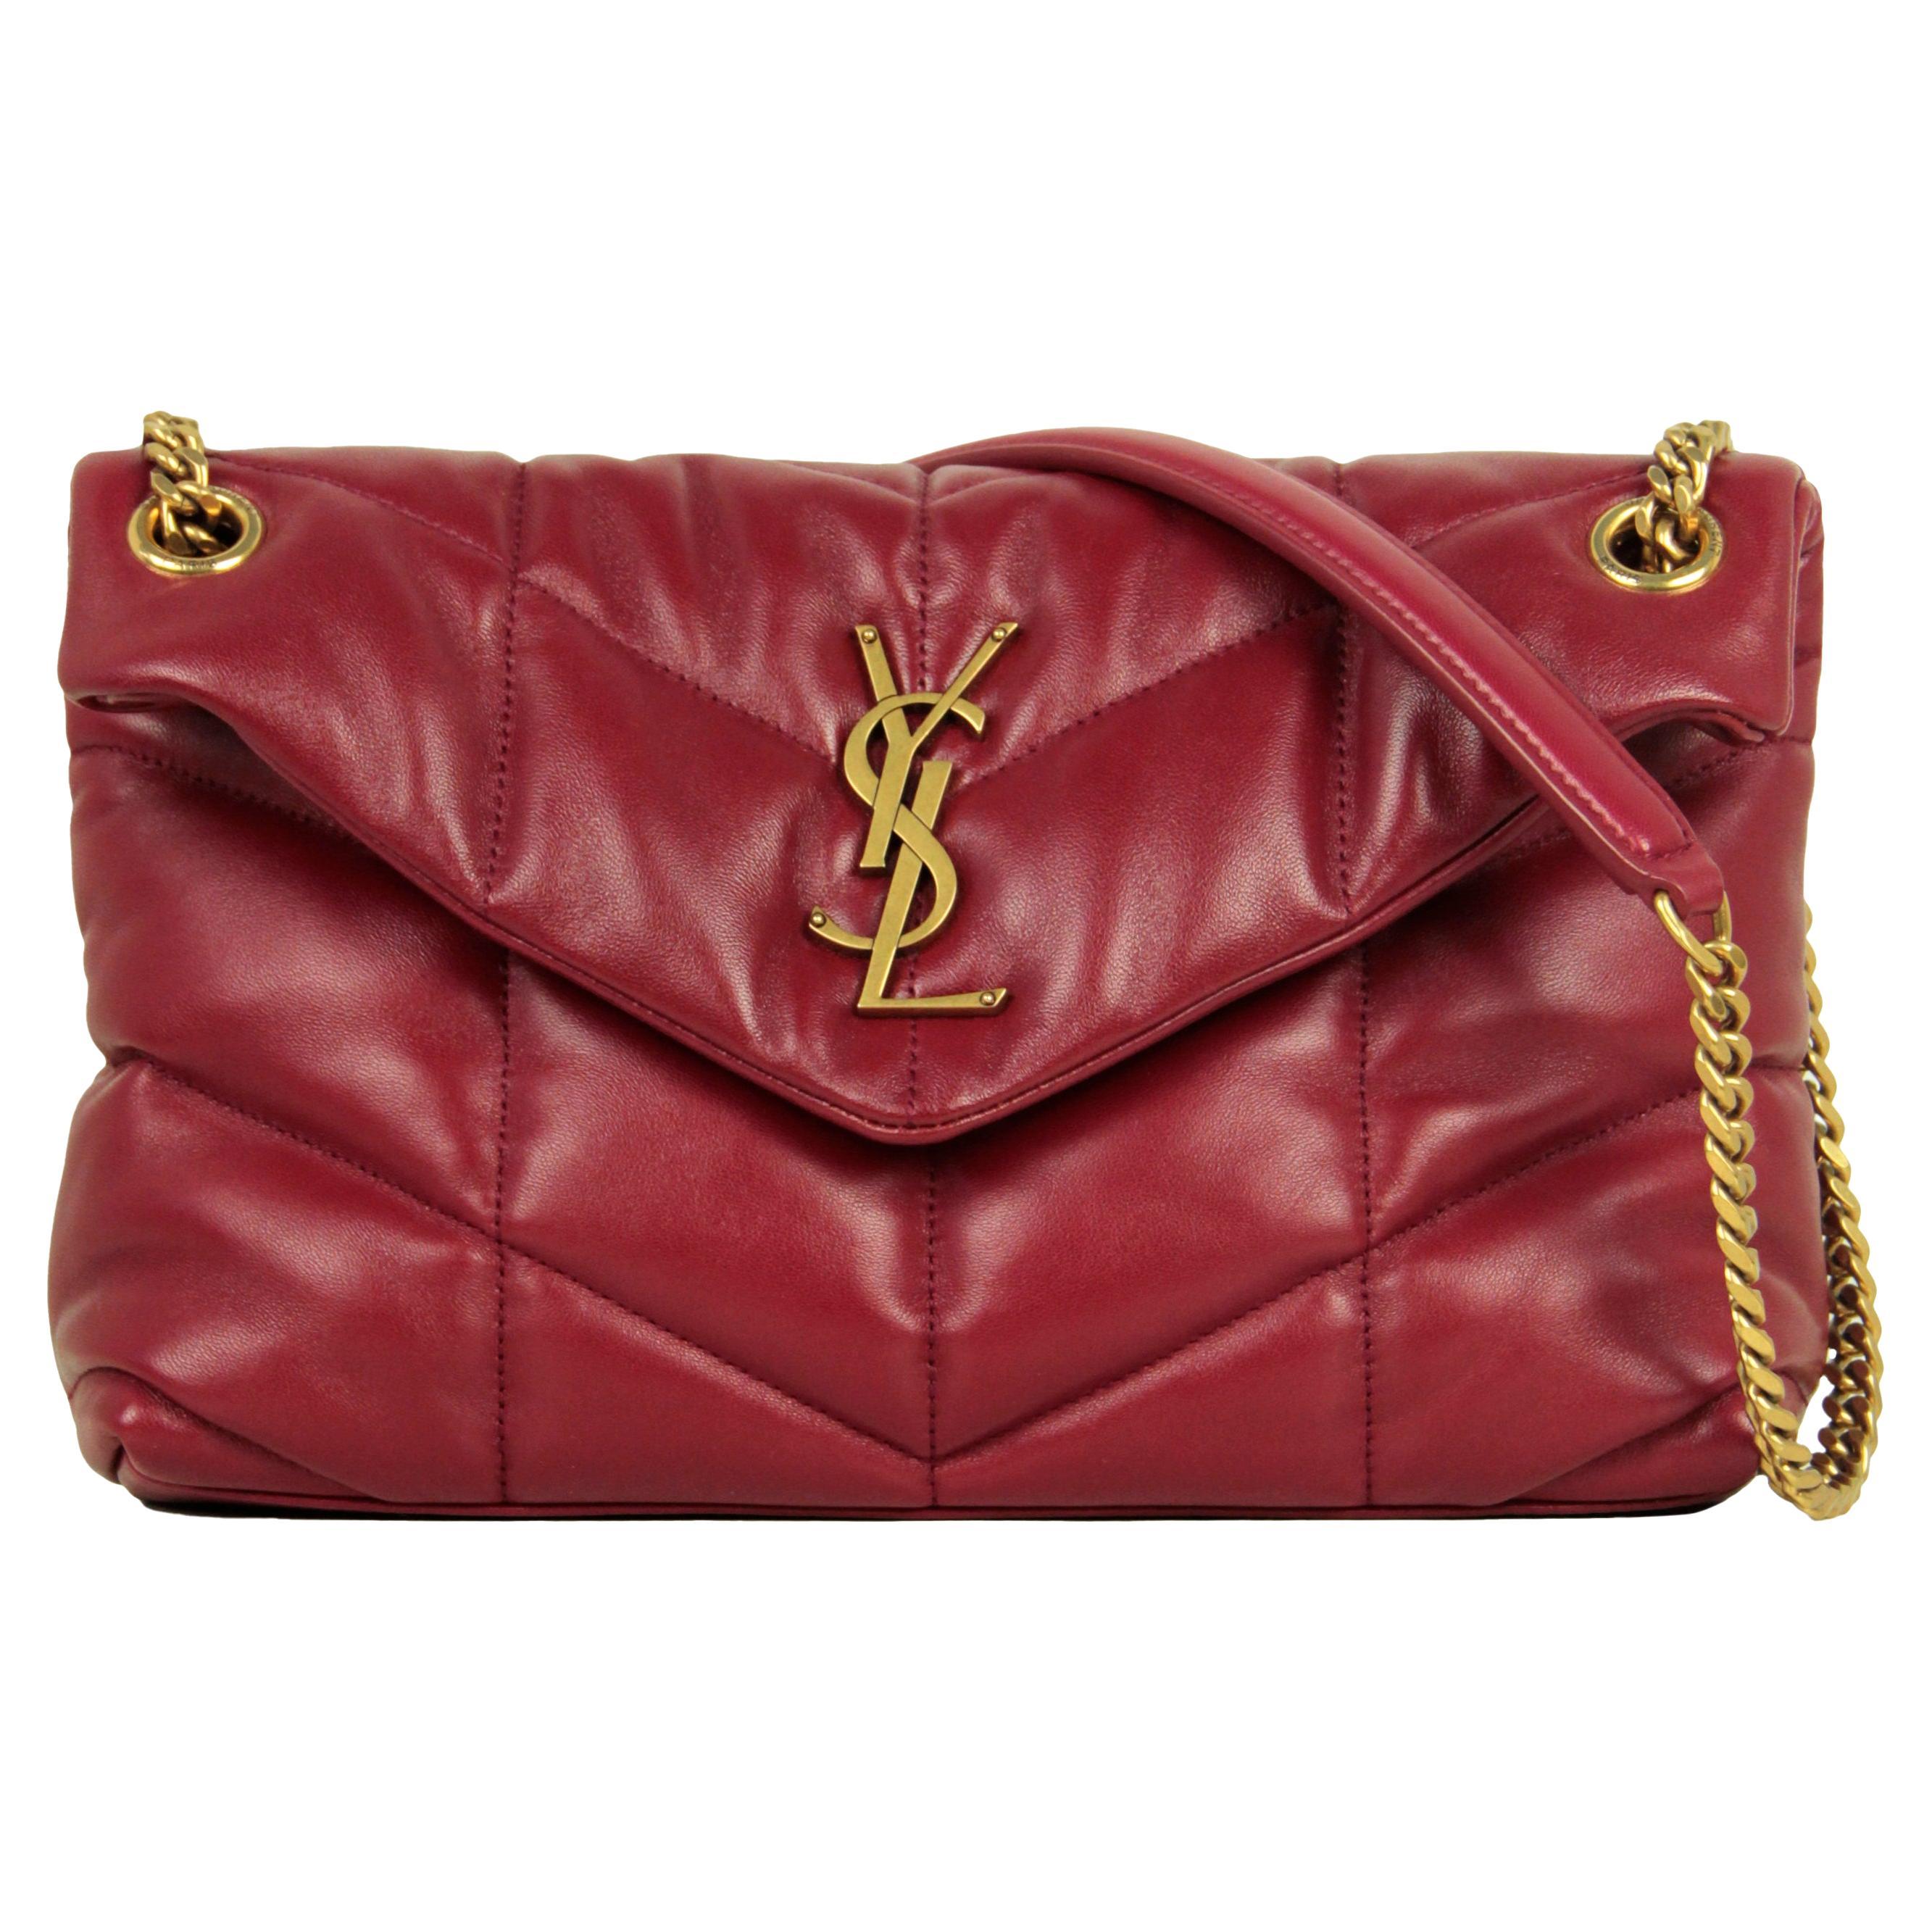 Saint Laurent Burgundy Leather Small Loulou Puffer Bag